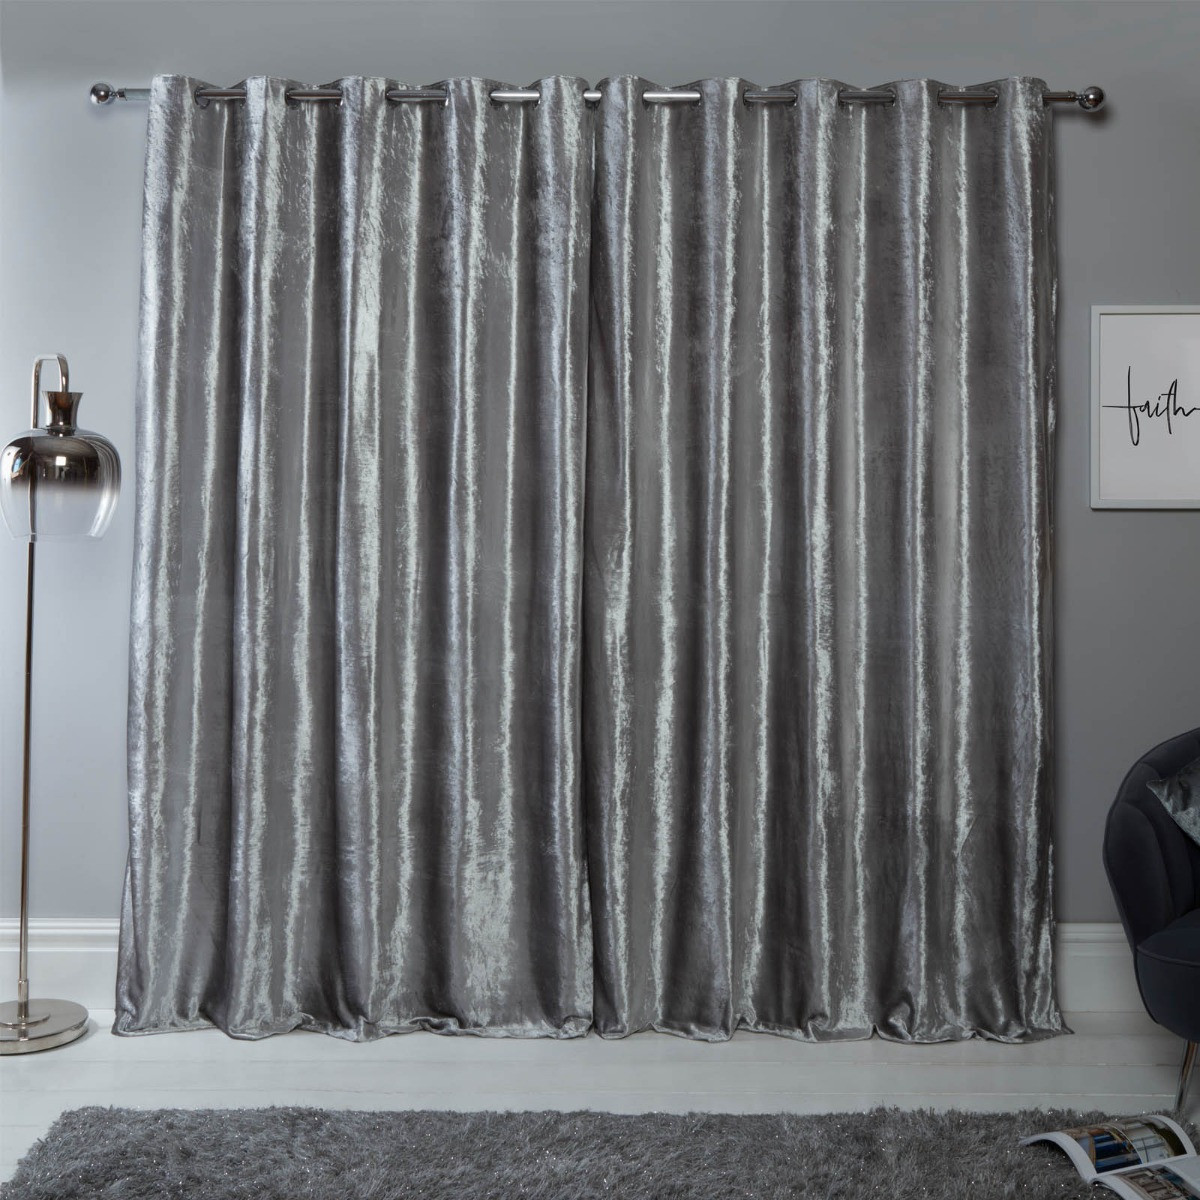 Sienna Home Crushed Velvet Eyelet Curtains - Silver 90" x 54">